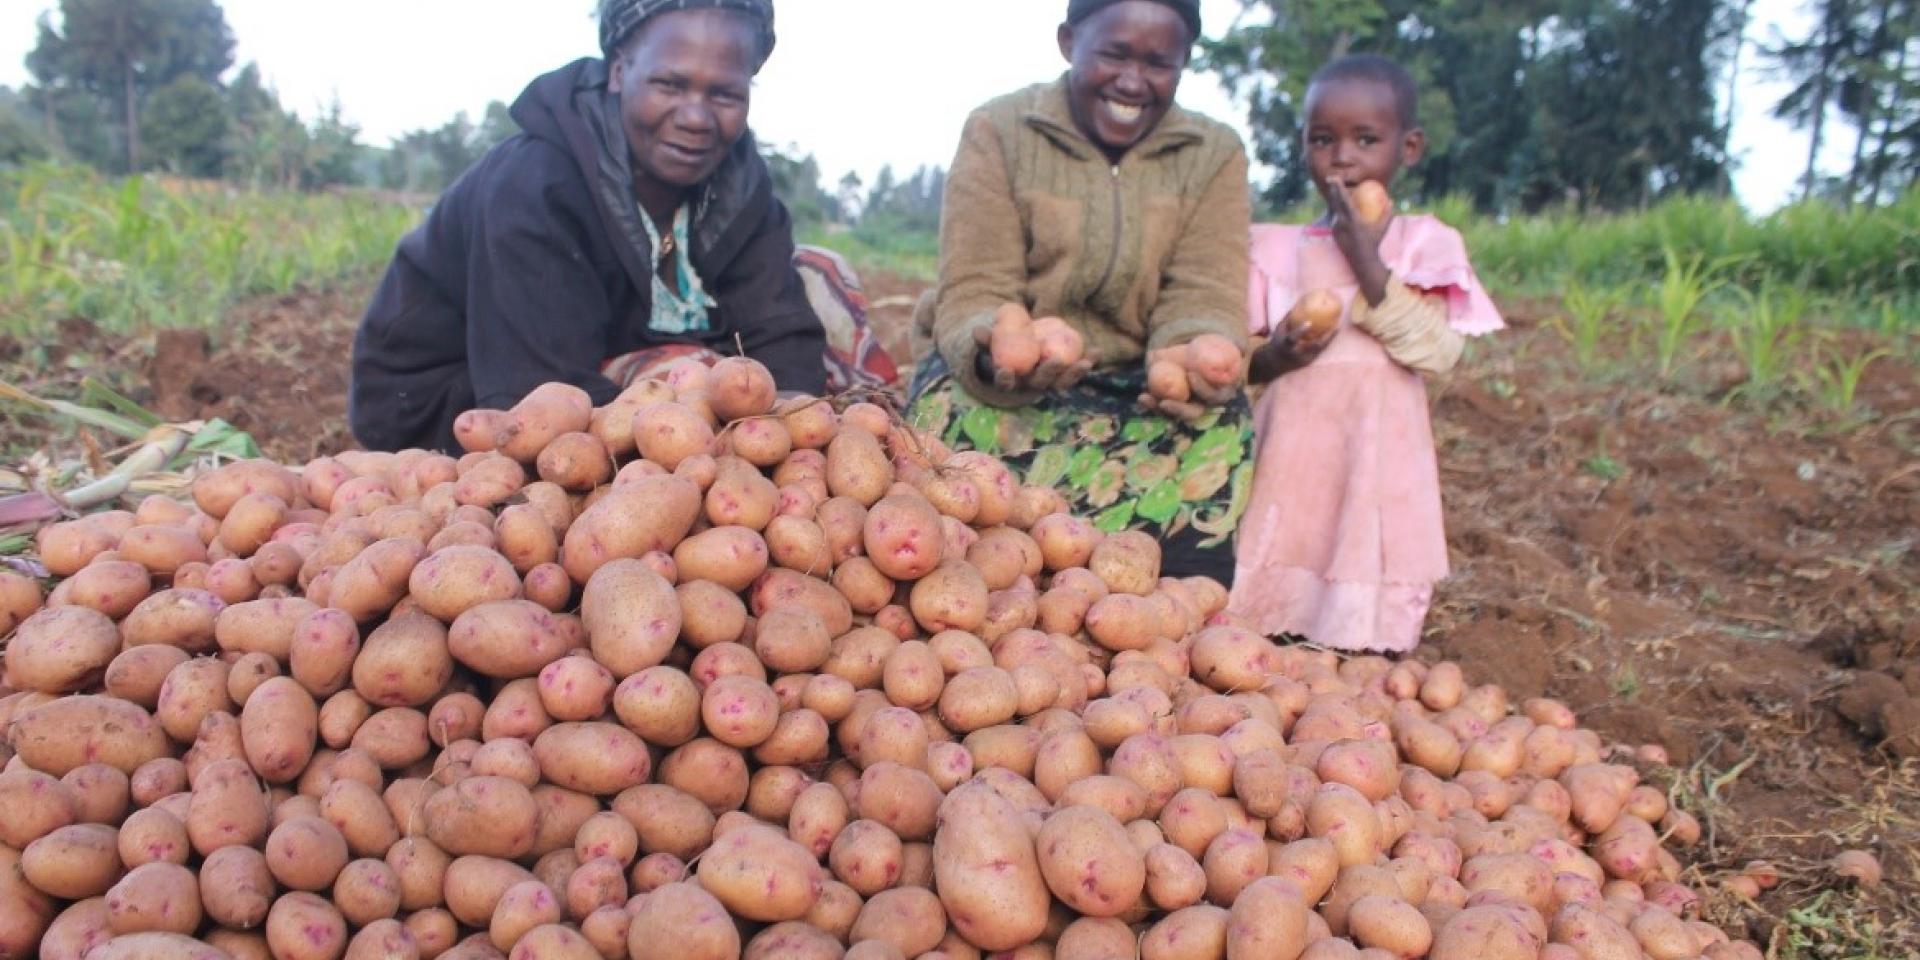 Two women, a girl and potatoes